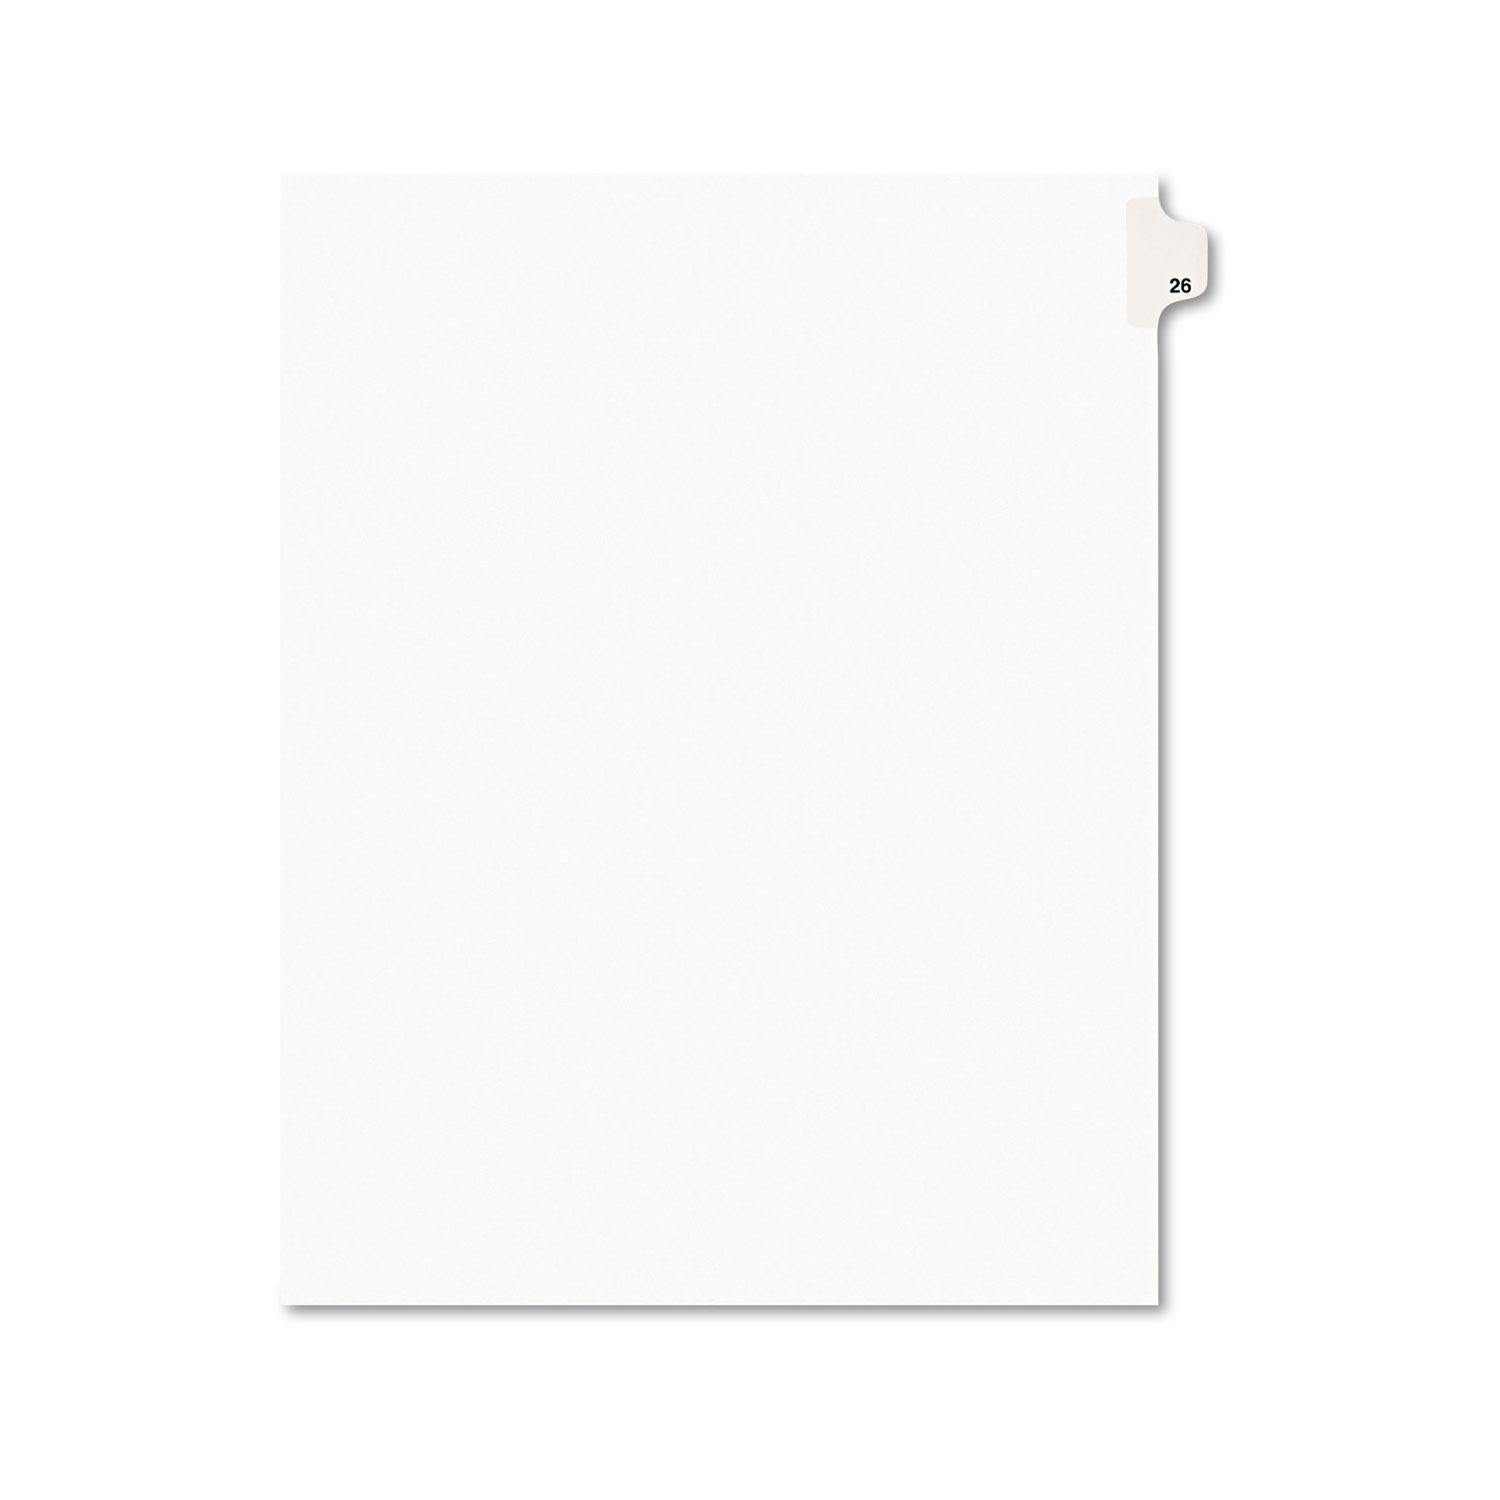  Avery 01026 Preprinted Legal Exhibit Side Tab Index Dividers, Avery Style, 10-Tab, 26, 11 x 8.5, White, 25/Pack (AVE01026) 